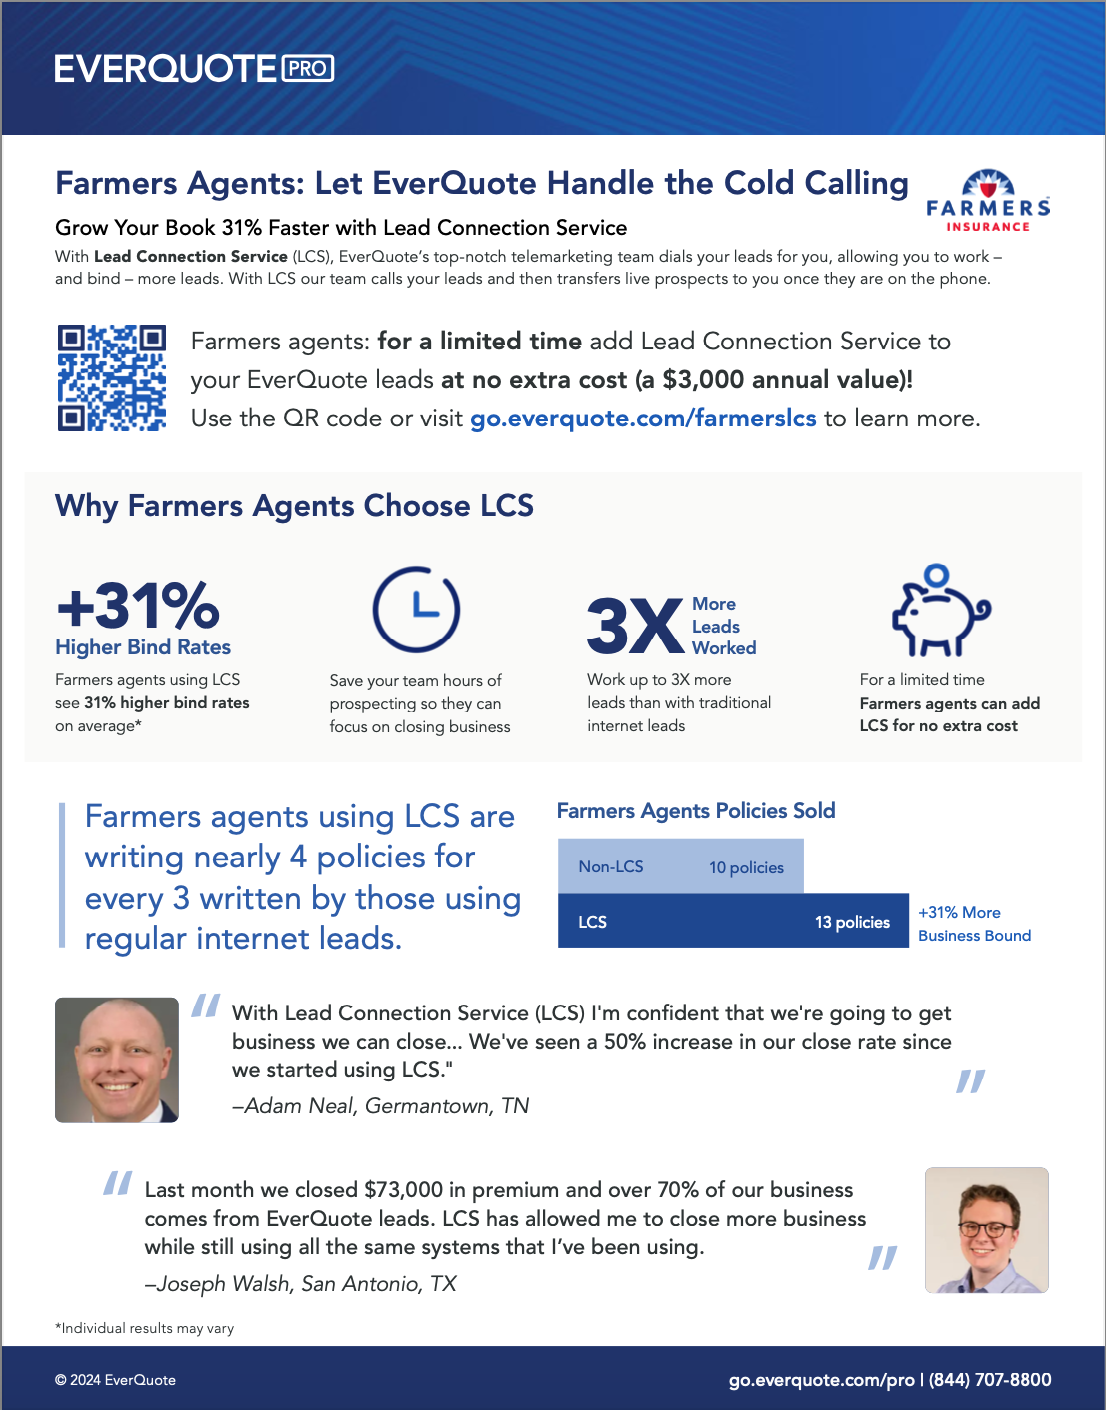 How Farmers Agents Are Growing 31% Faster With Lead Connection Service (LCS)